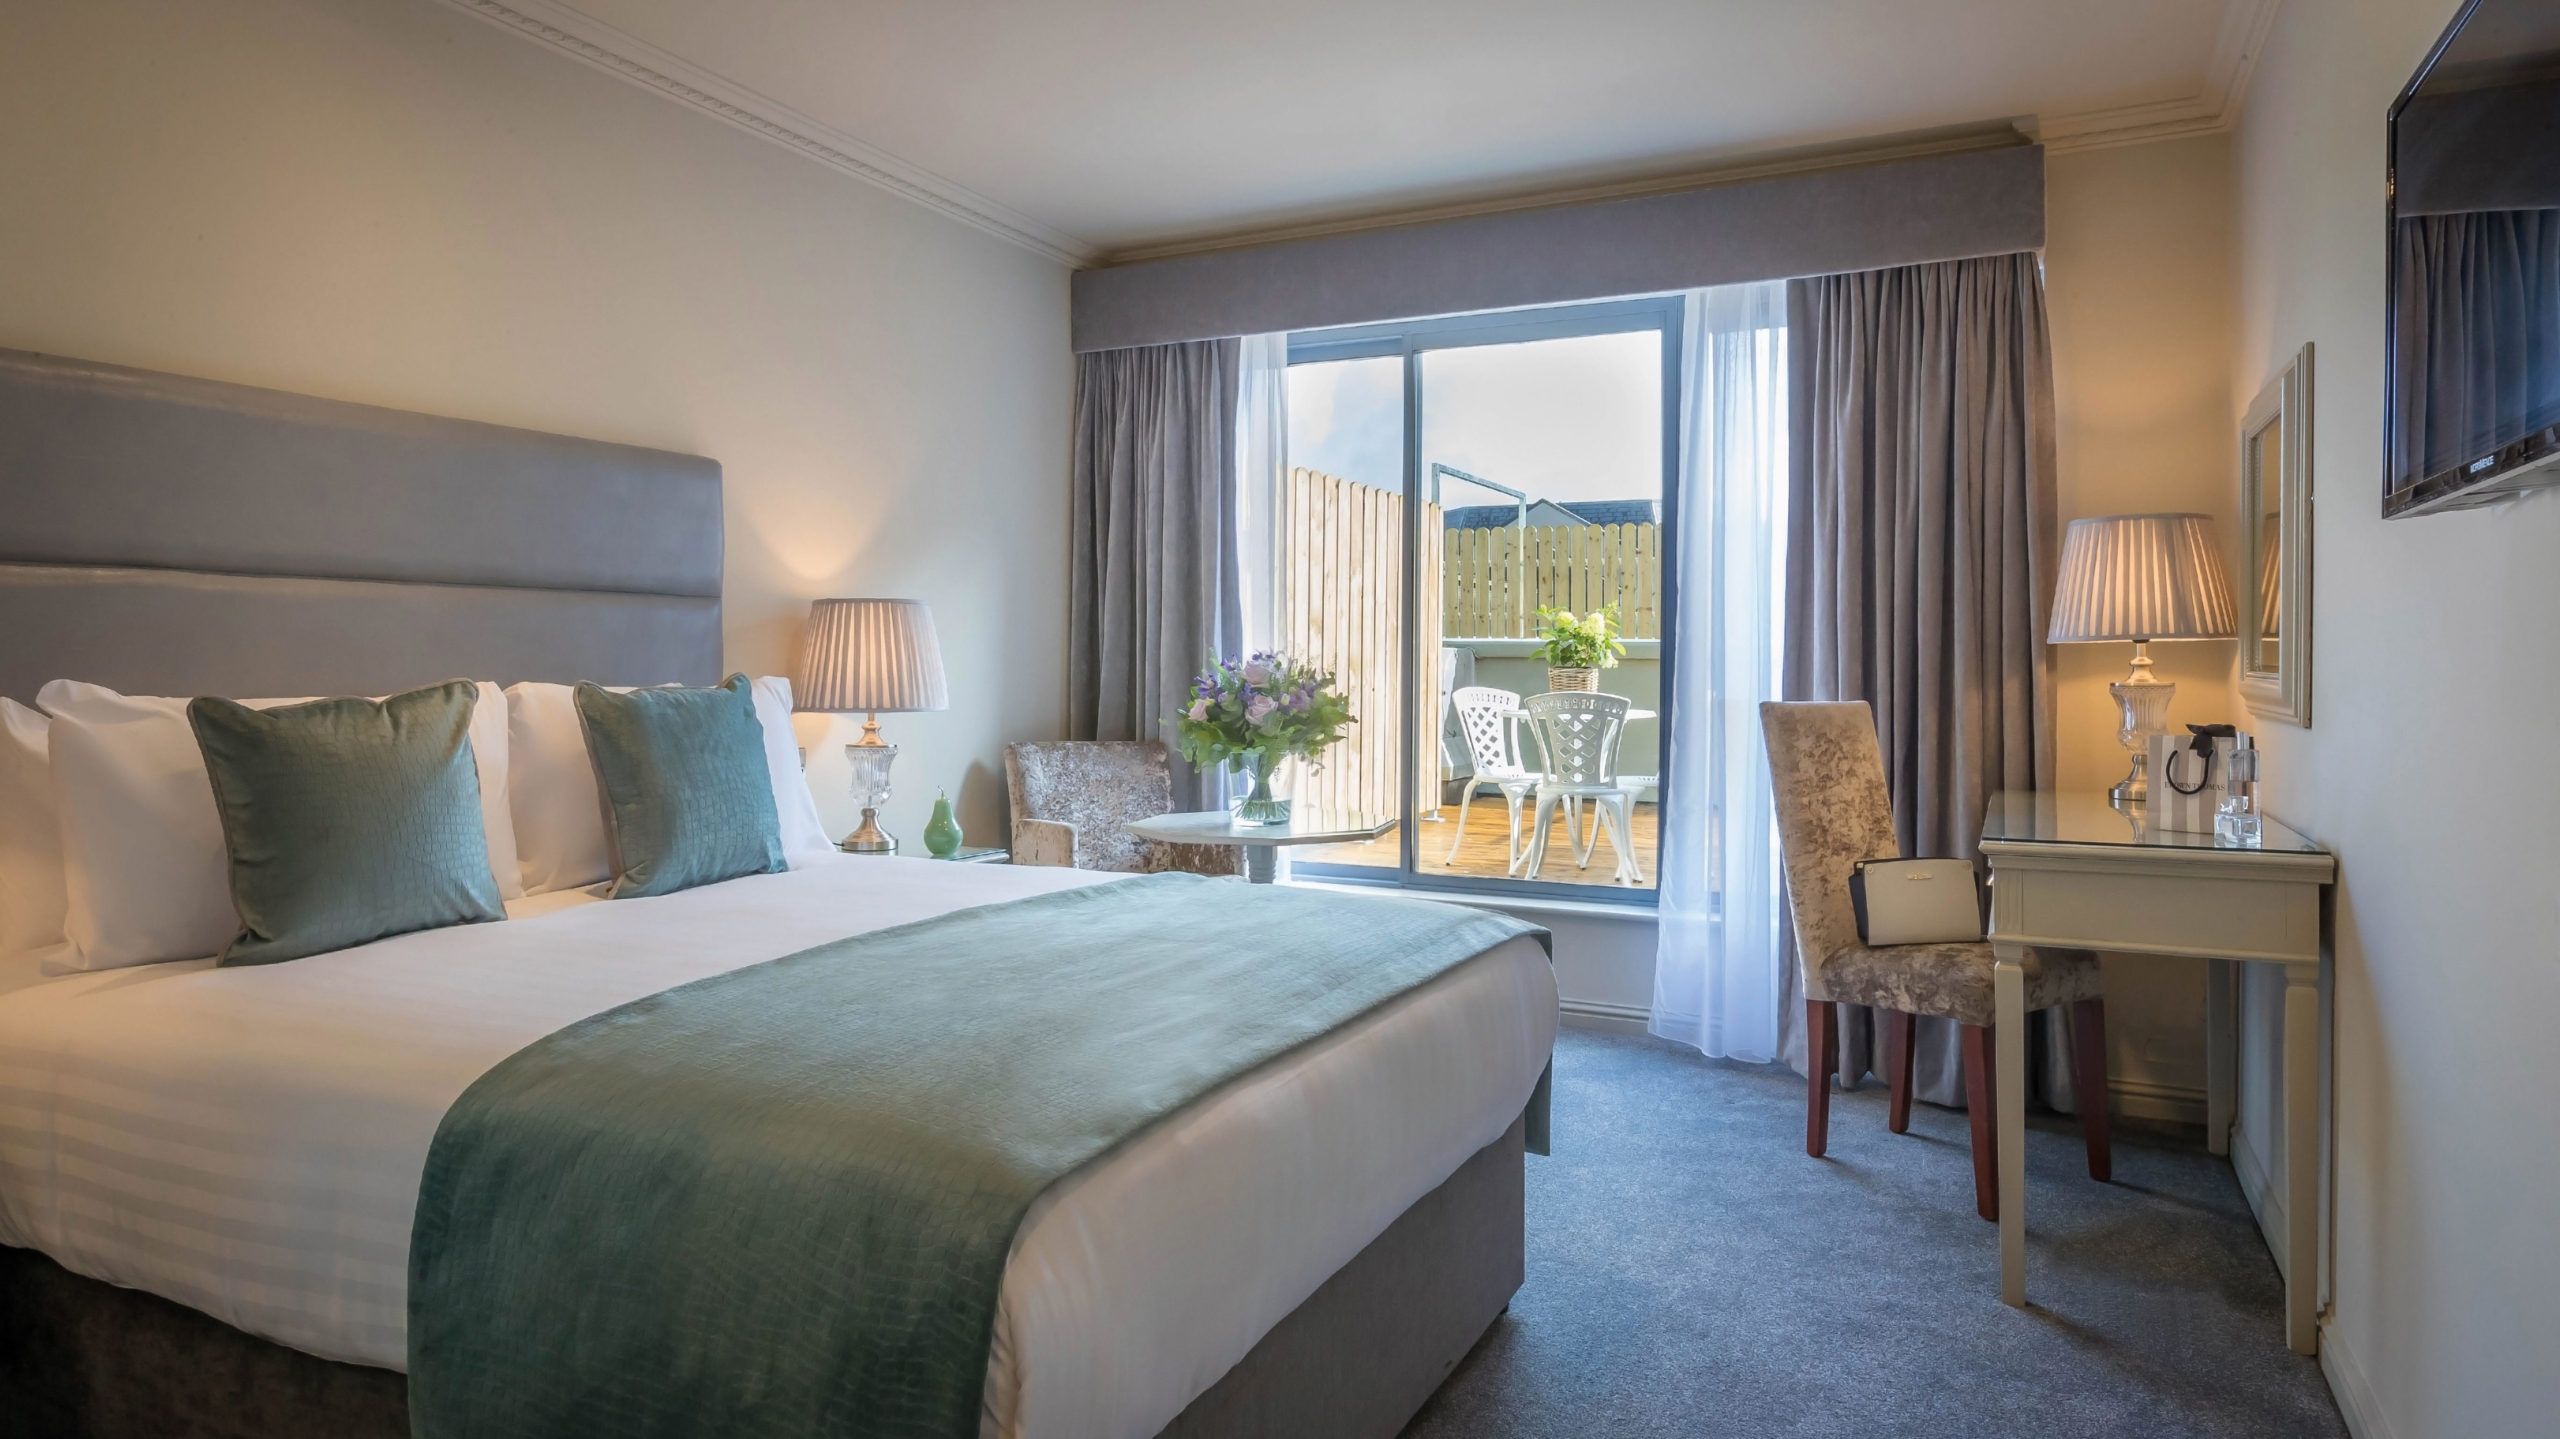 Stylish Hotel Bedrooms at The Forster Court Hotel - part of The Connacht Hospitality Group